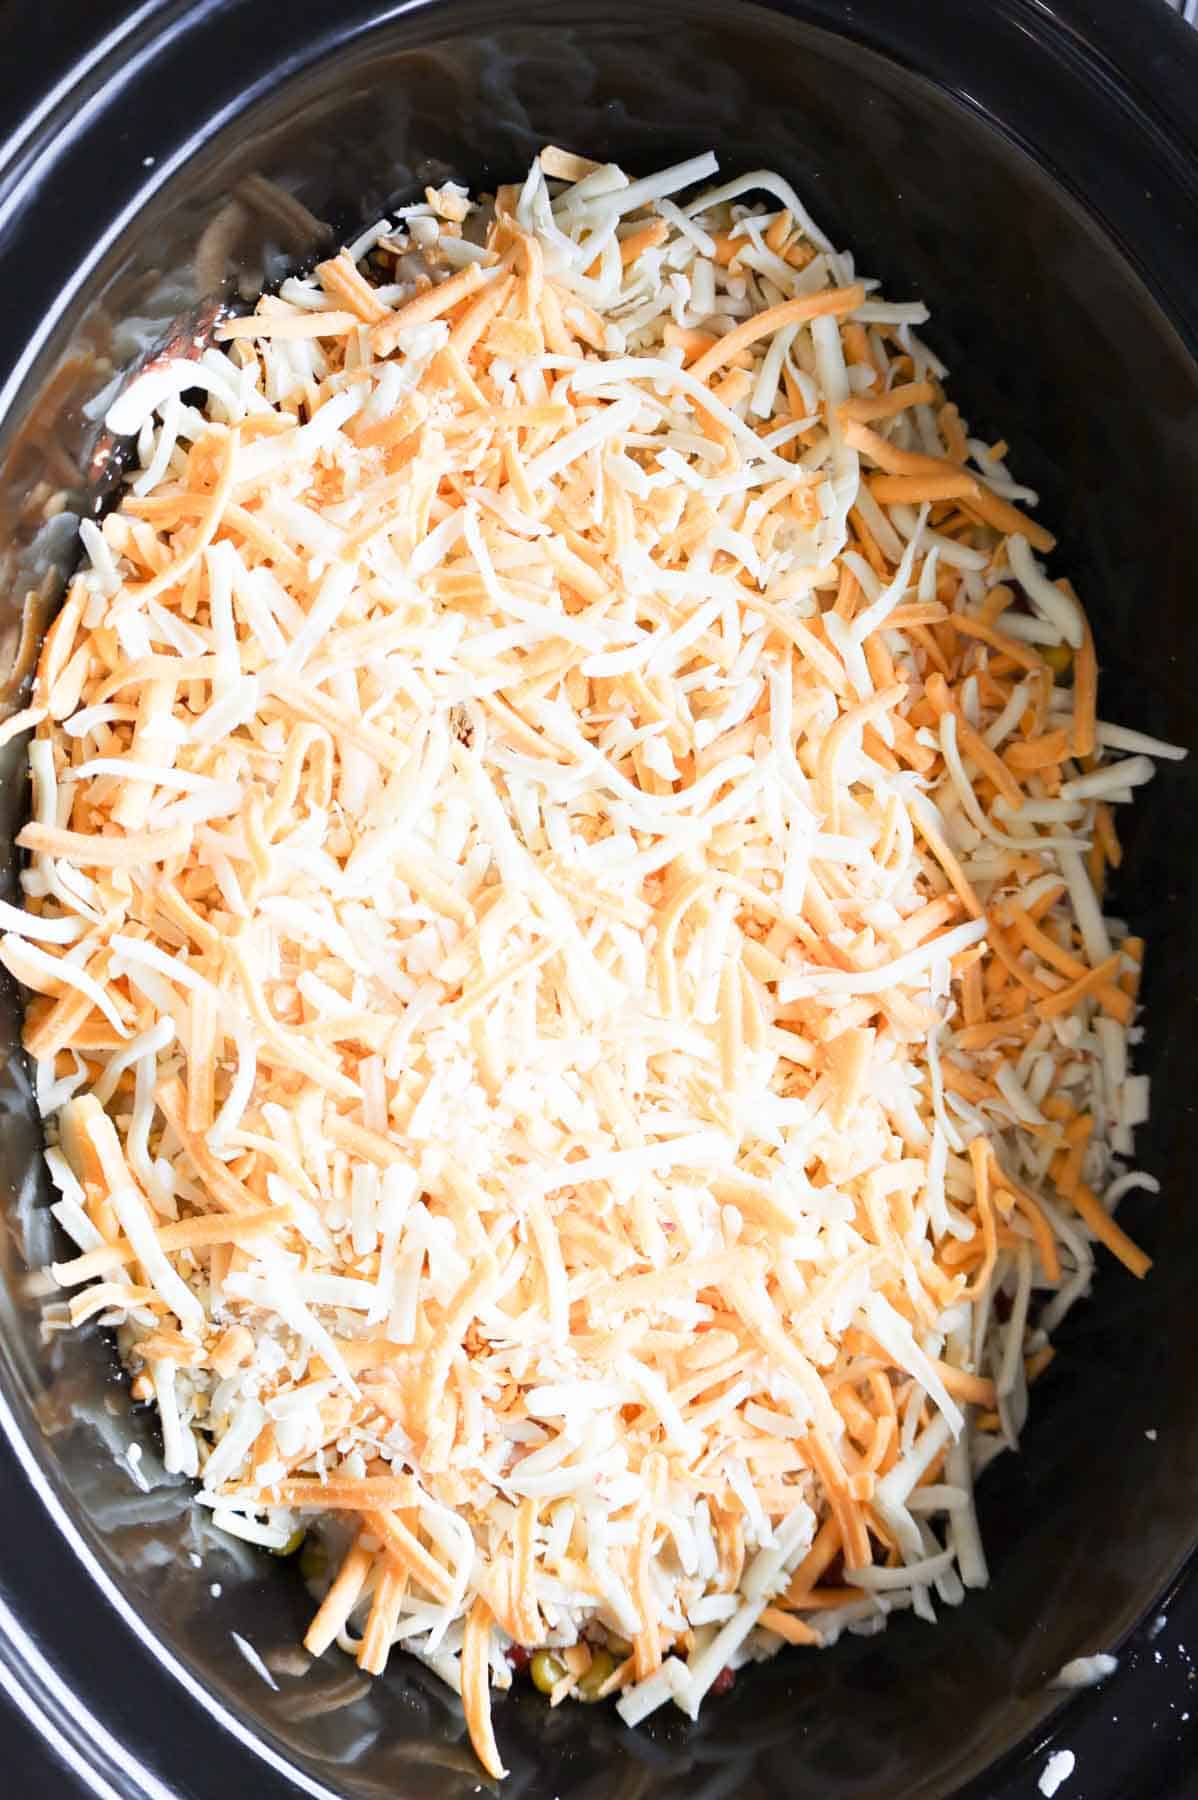 shredded cheddar cheese on top of tater tot casserole in a crock pot